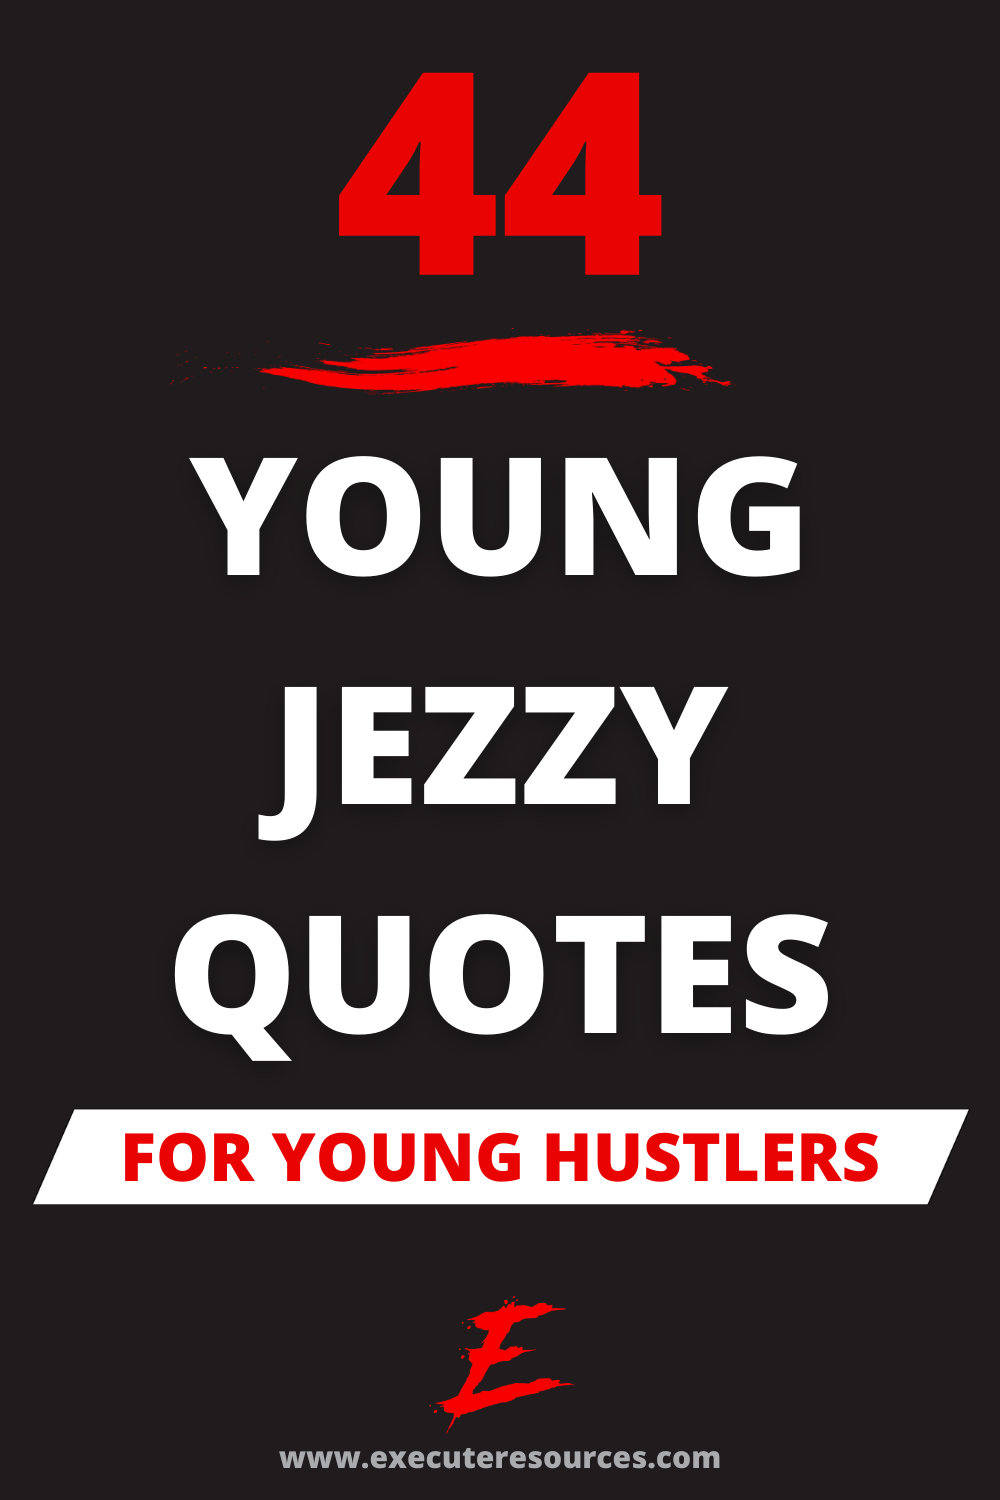 44 Smooth Young Jezzy Quotes For Young Hustlers - Execute Resources